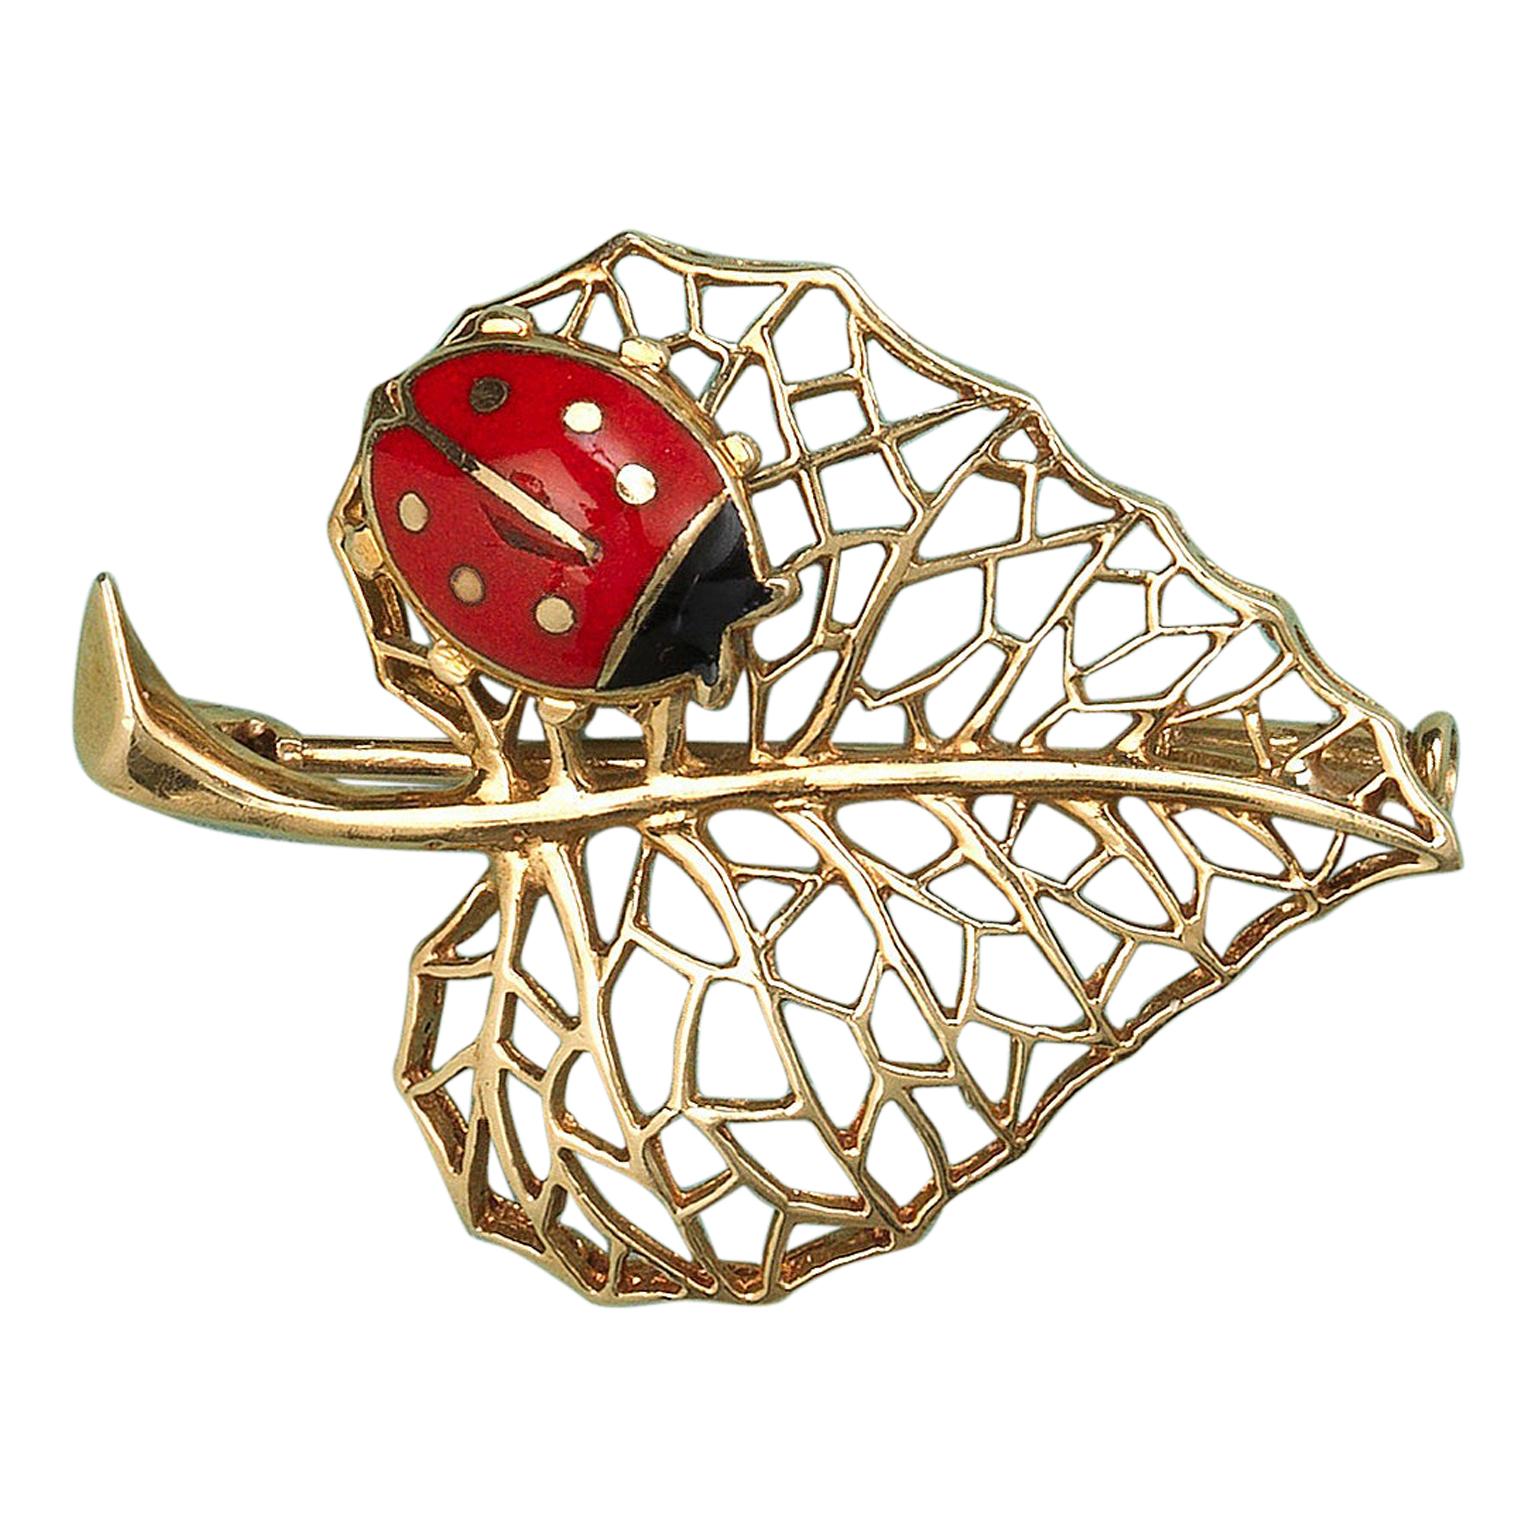 Cartier Gold Leaf Brooch with a Ladybird